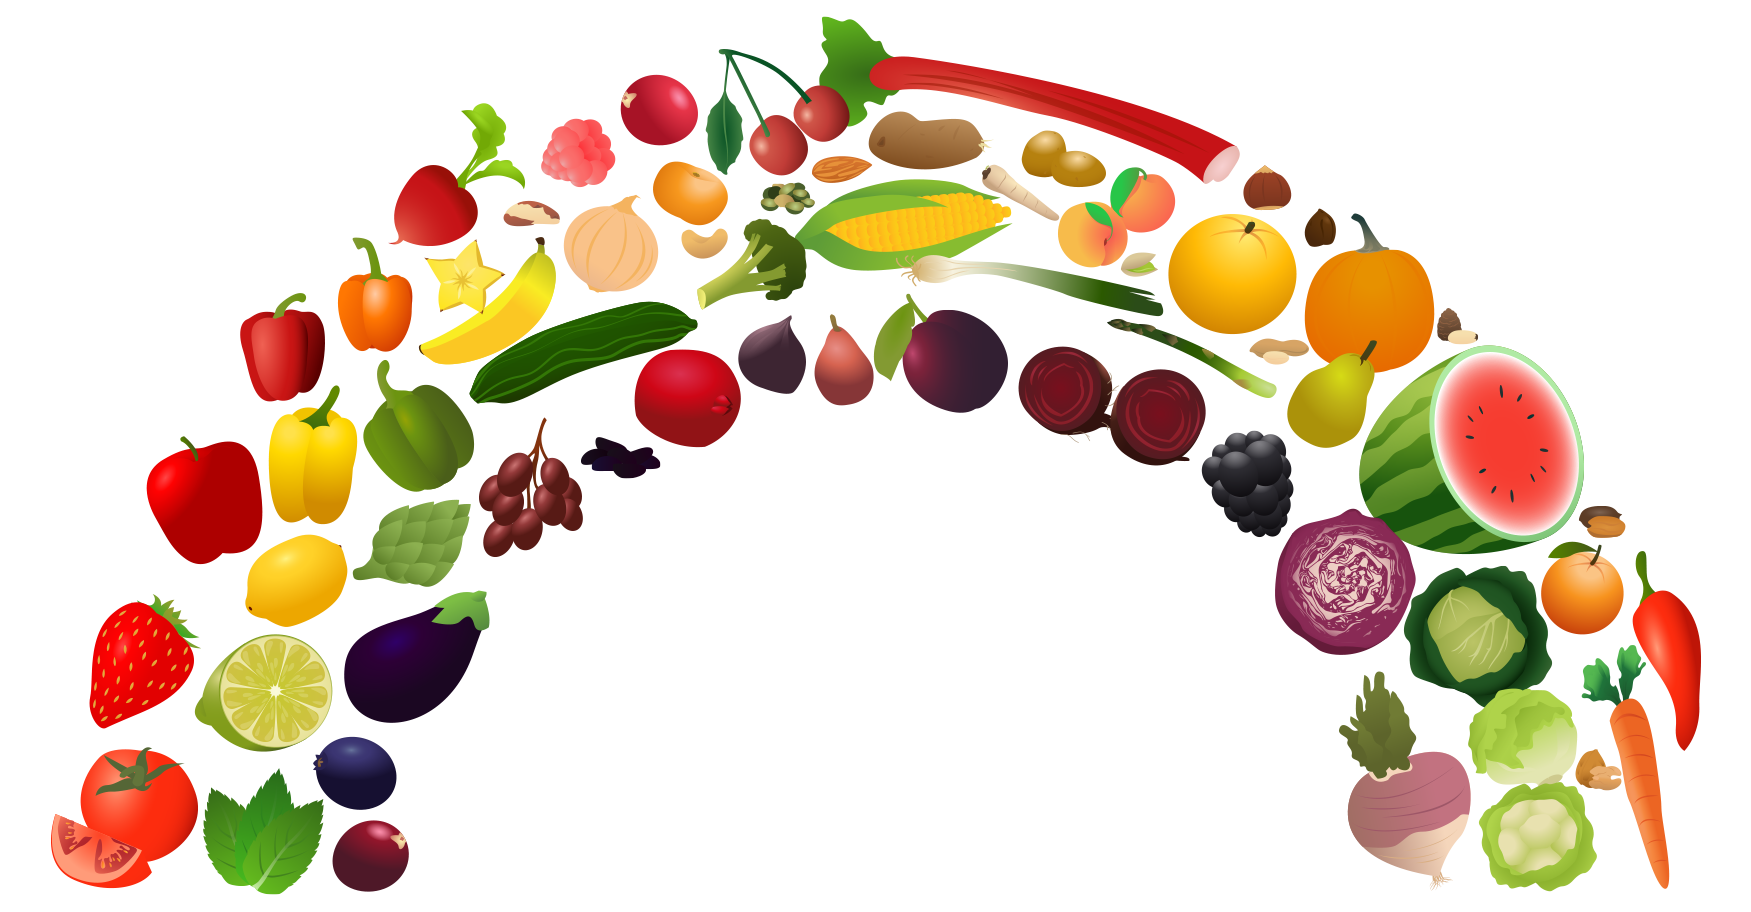 Clipart Of The Lots Of Healthy Food Free Image Download